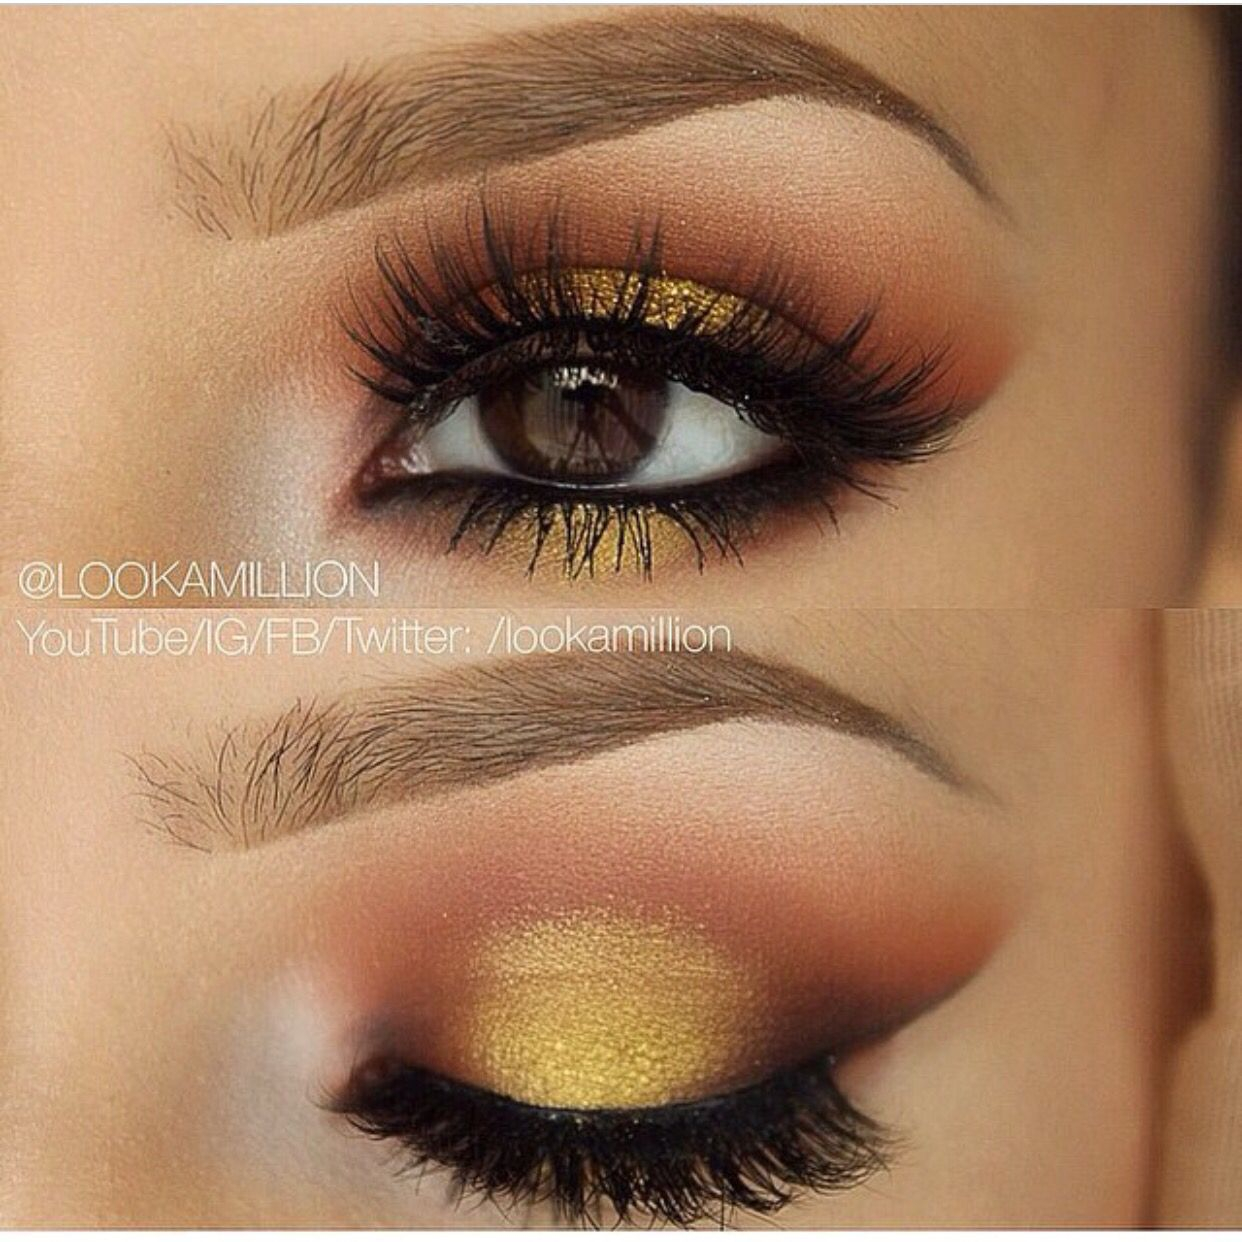 Yellow Eye Makeup Another Cute Yellow Preferred Eye Makeup Look Very Similar To The